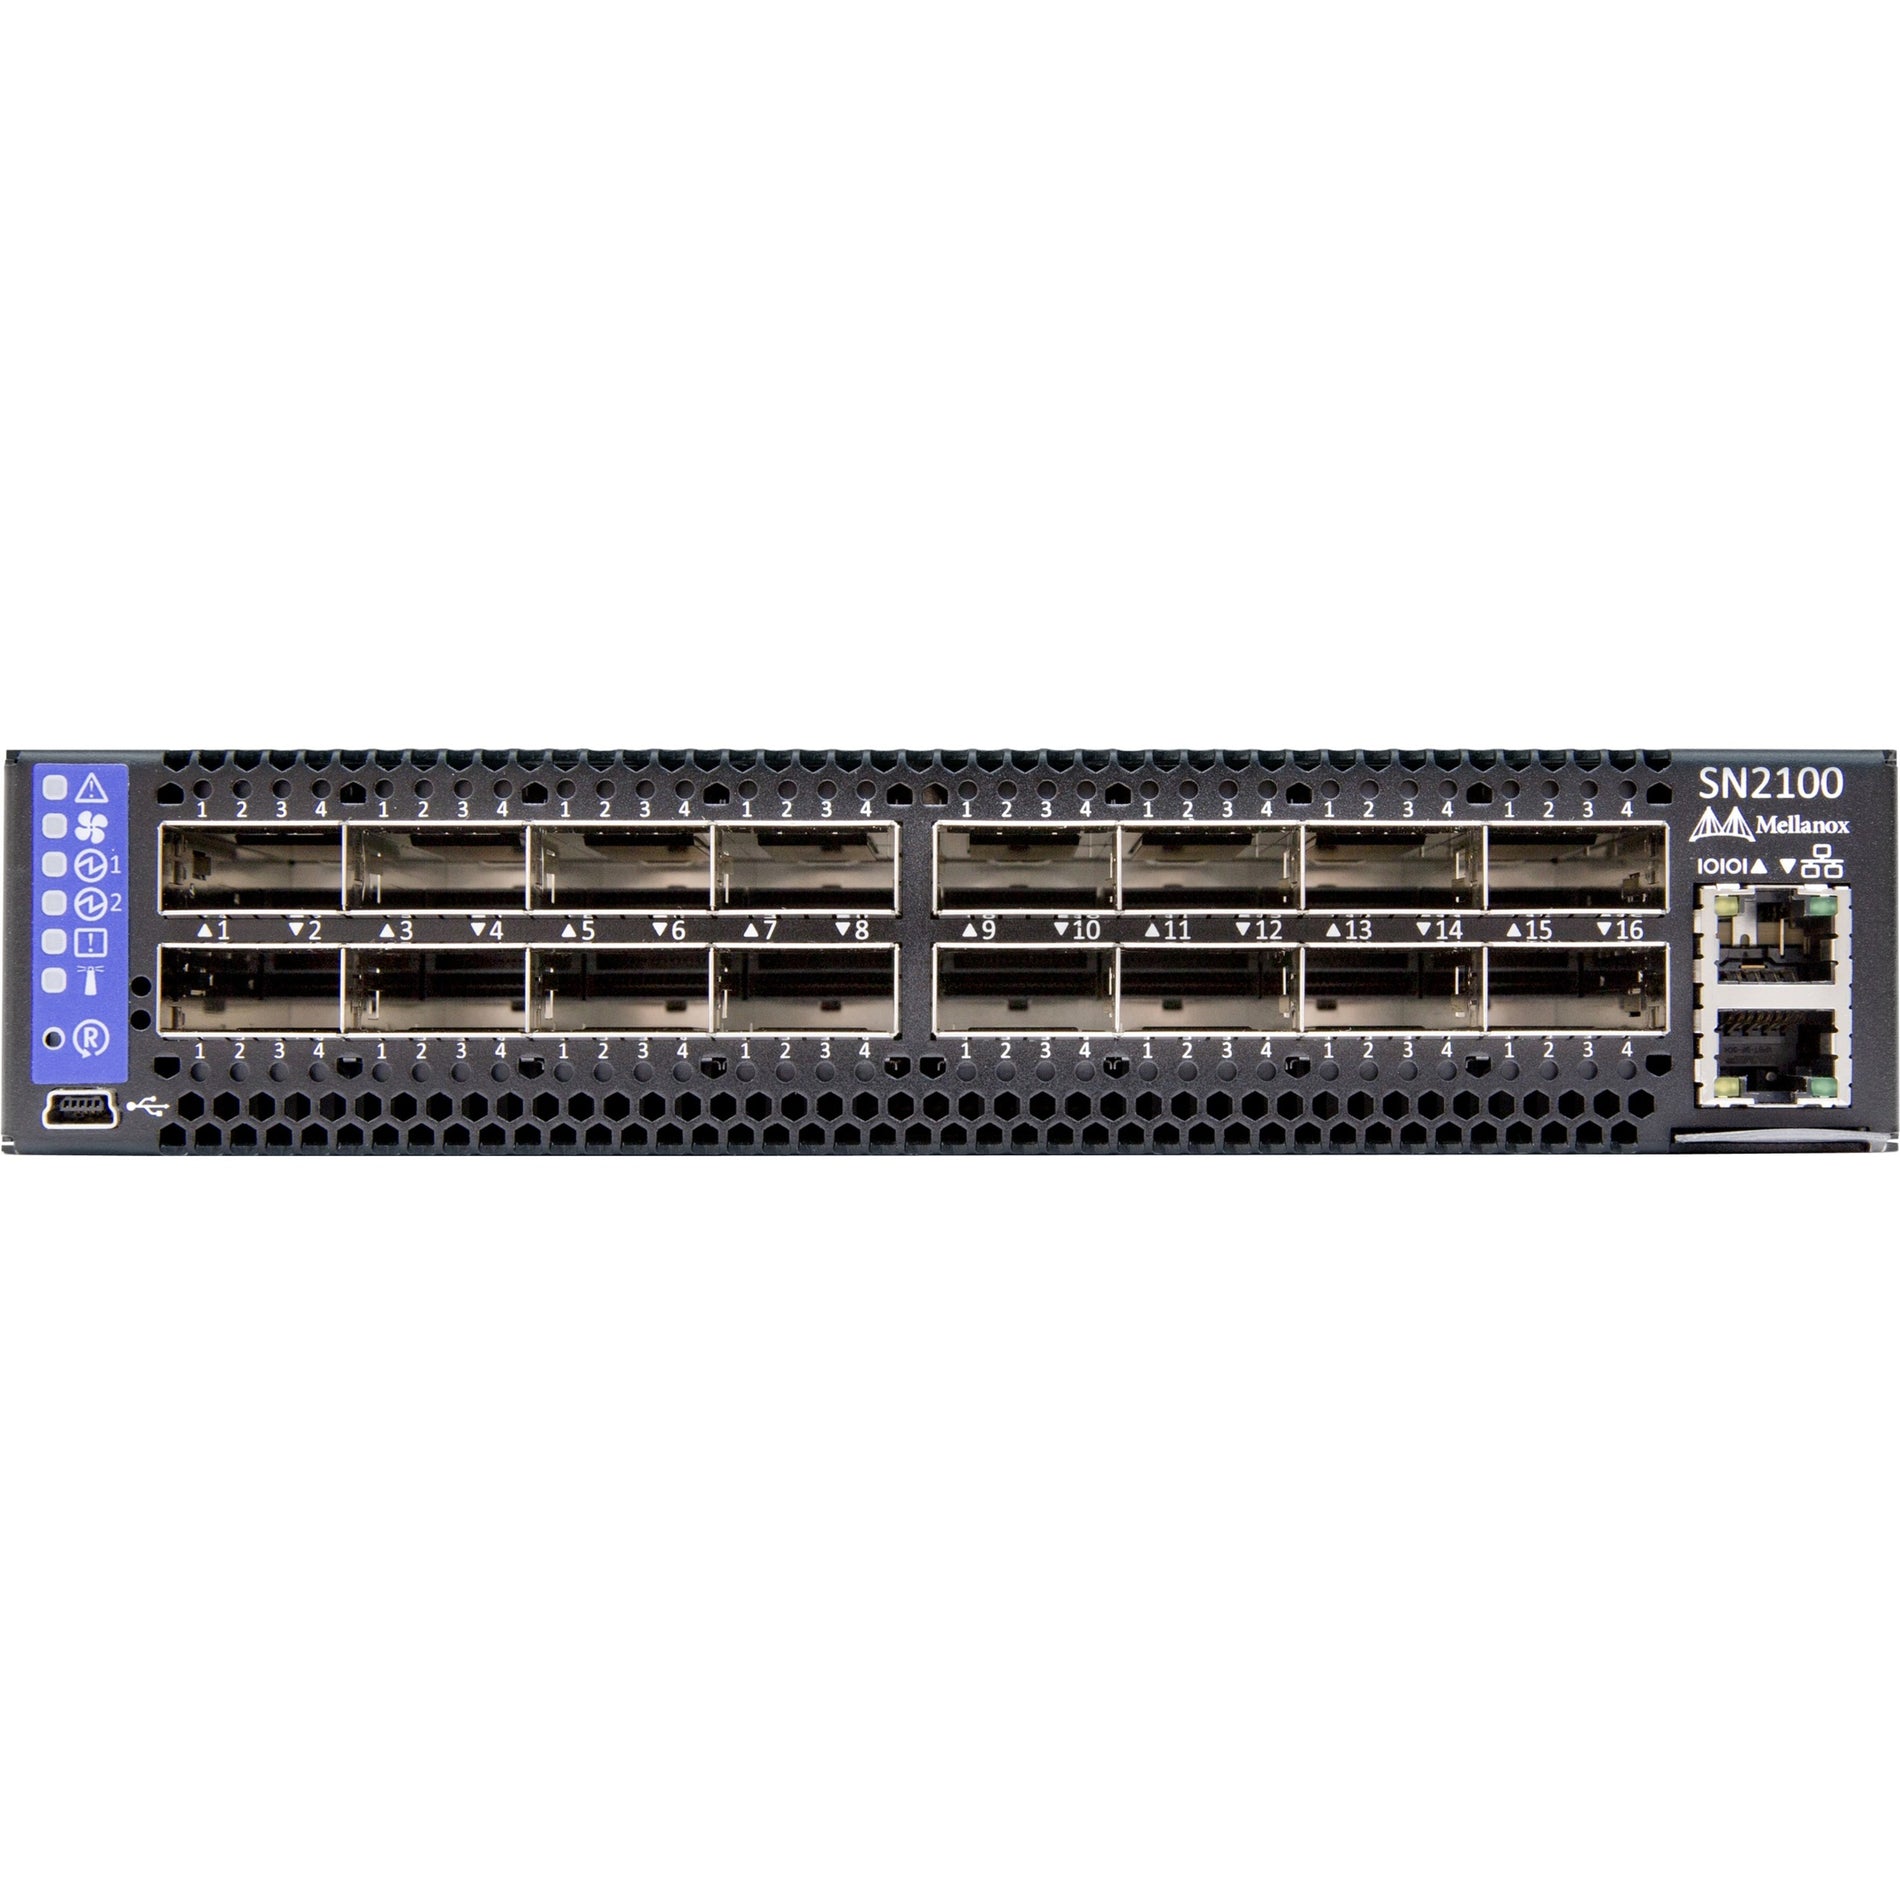 Mellanox Spectrum SN2100 Ethernet Switch - High-Speed Networking Solution [Discontinued]